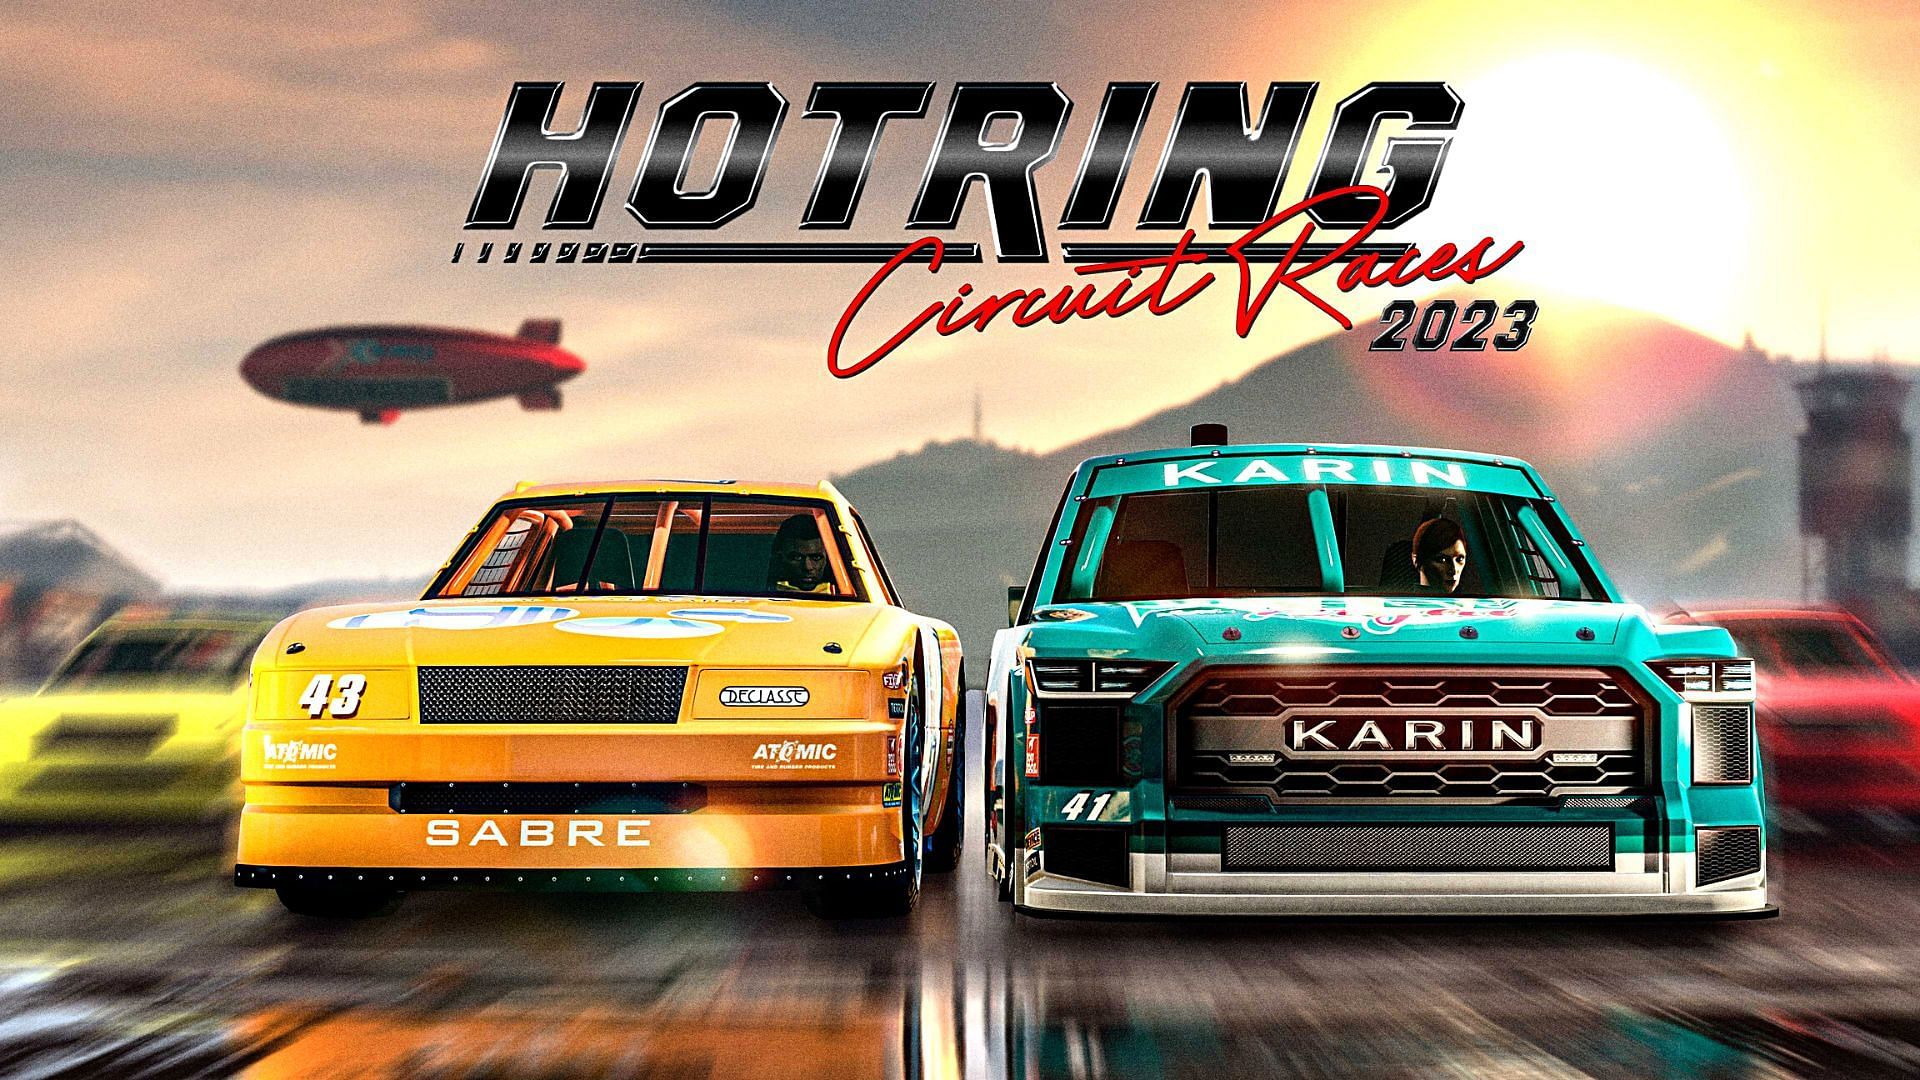 A brief about the new Hotring Circuit Races 2023 added to GTA Online with the new weekly update (Image via Rockstar Games)